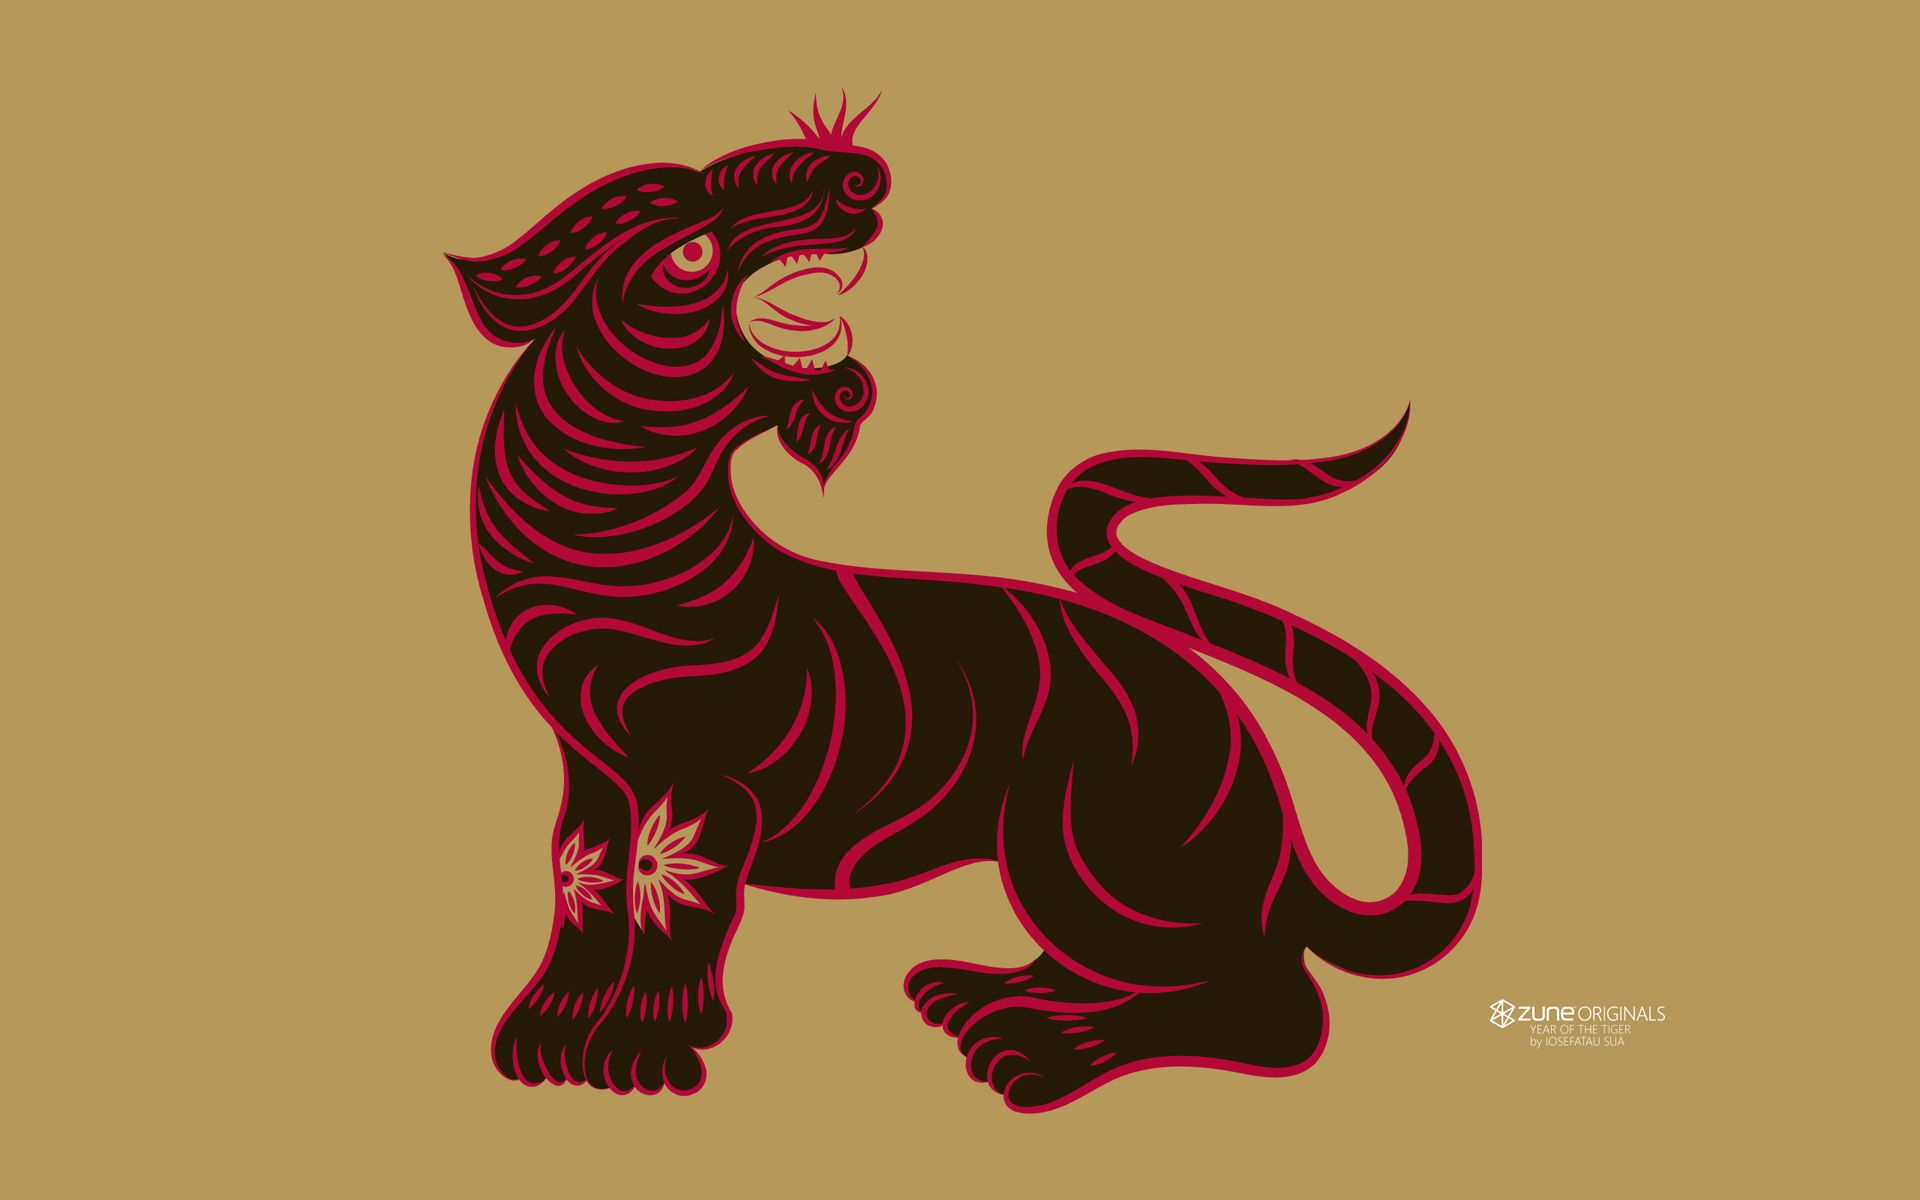 Chinese Zodiac Wallpaper: year of the Tiger. Year of the tiger, Zodiac, Chinese zodiac